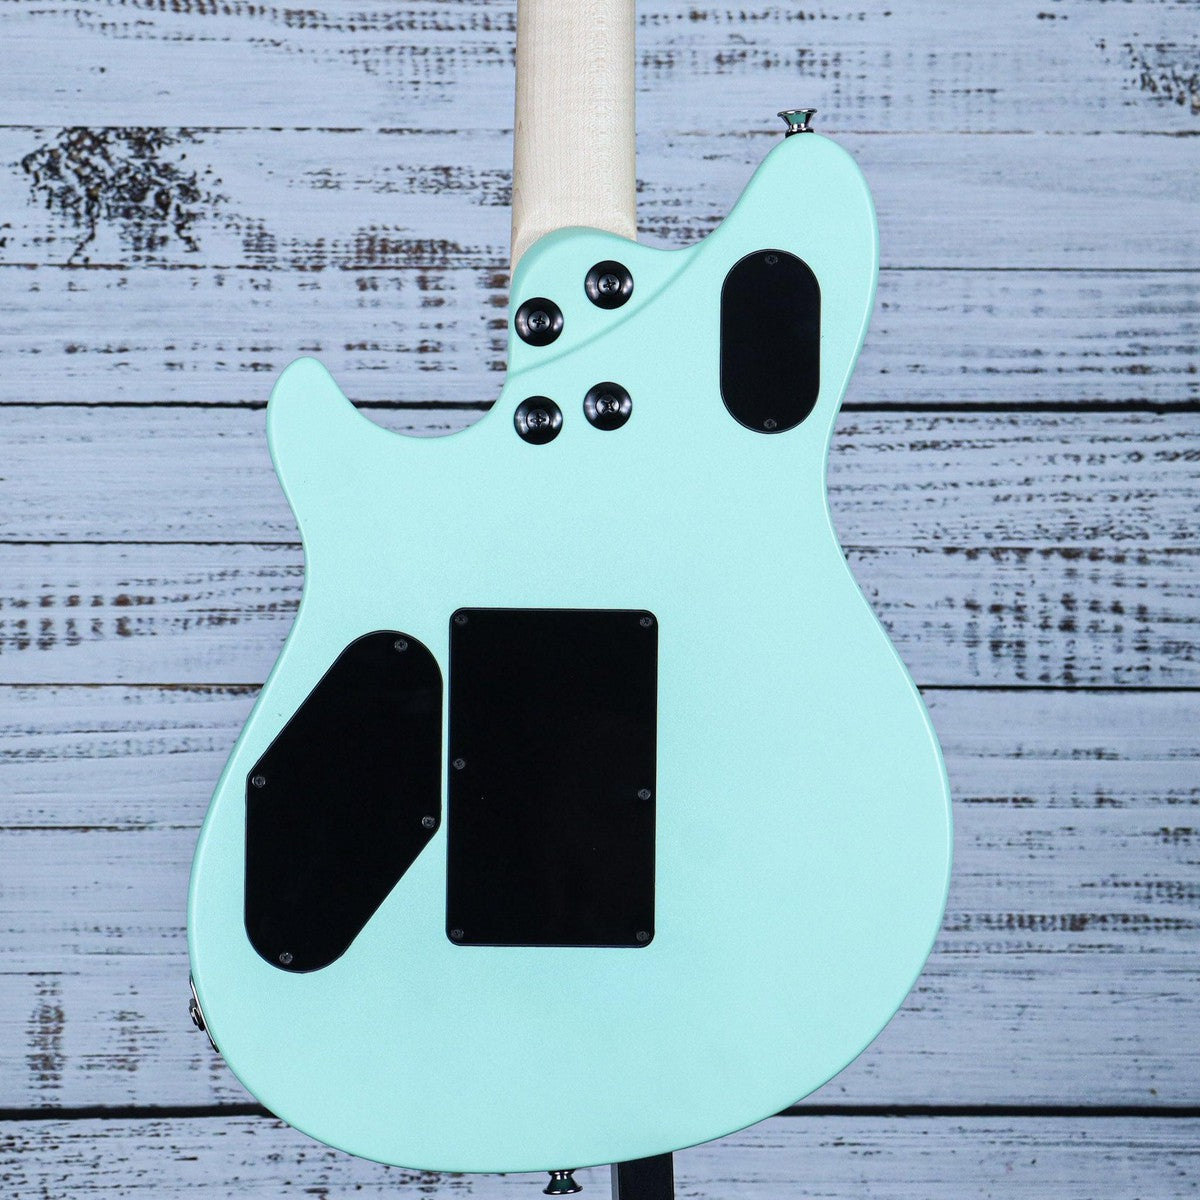 EVH Wolfgang Special Electric Guitar | Satin Surf Green